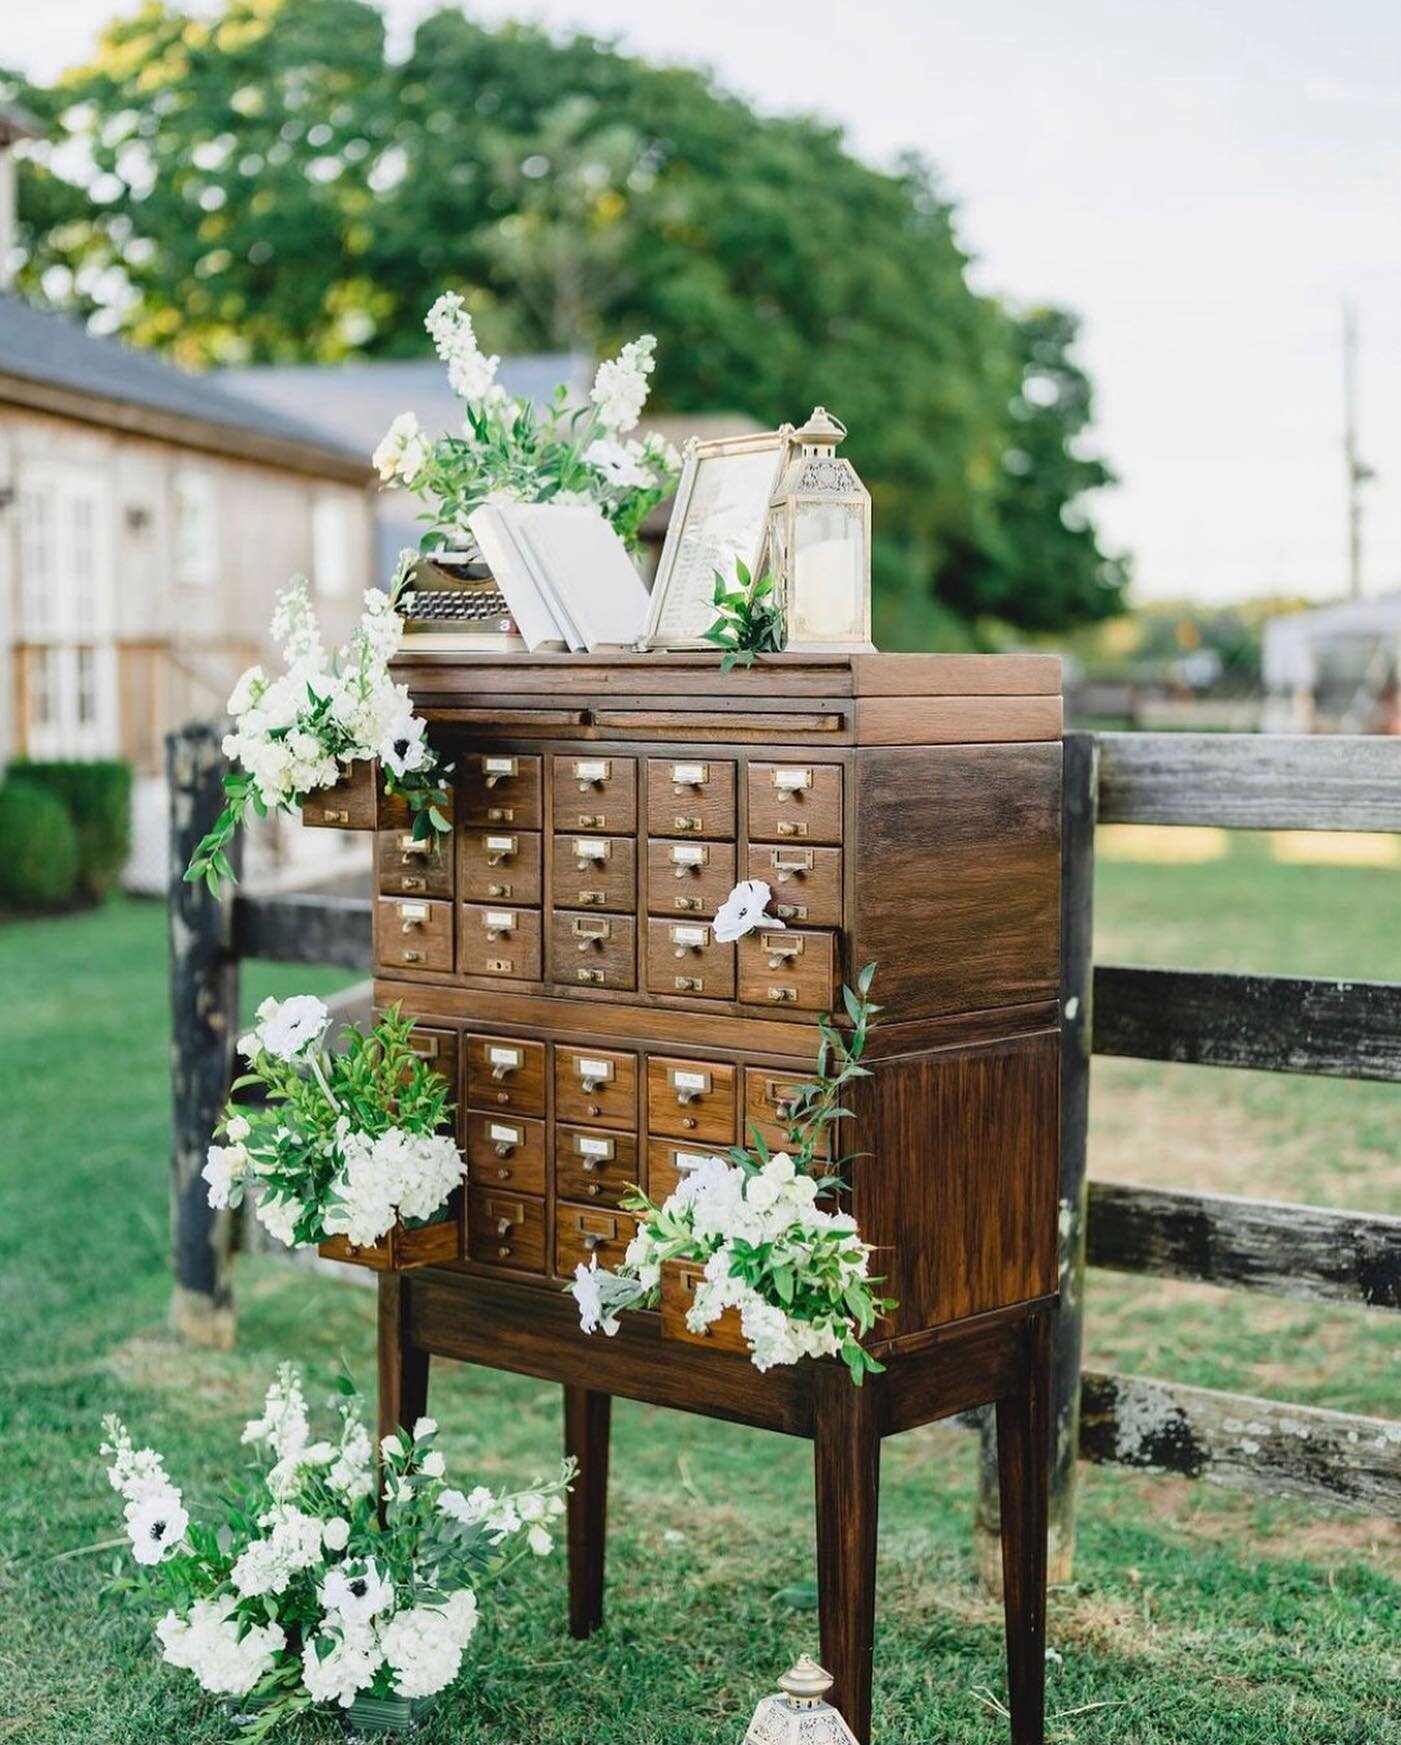 Fun fact- Our library card catalog can be separated if you don&rsquo;t need the full setup.  You can rent just one 15 drawer section with or without the table as well ☺️.

Planner: @jenniferbevents 
Bride: @elenilazarides 
Florals: @flowersbybrian 
V